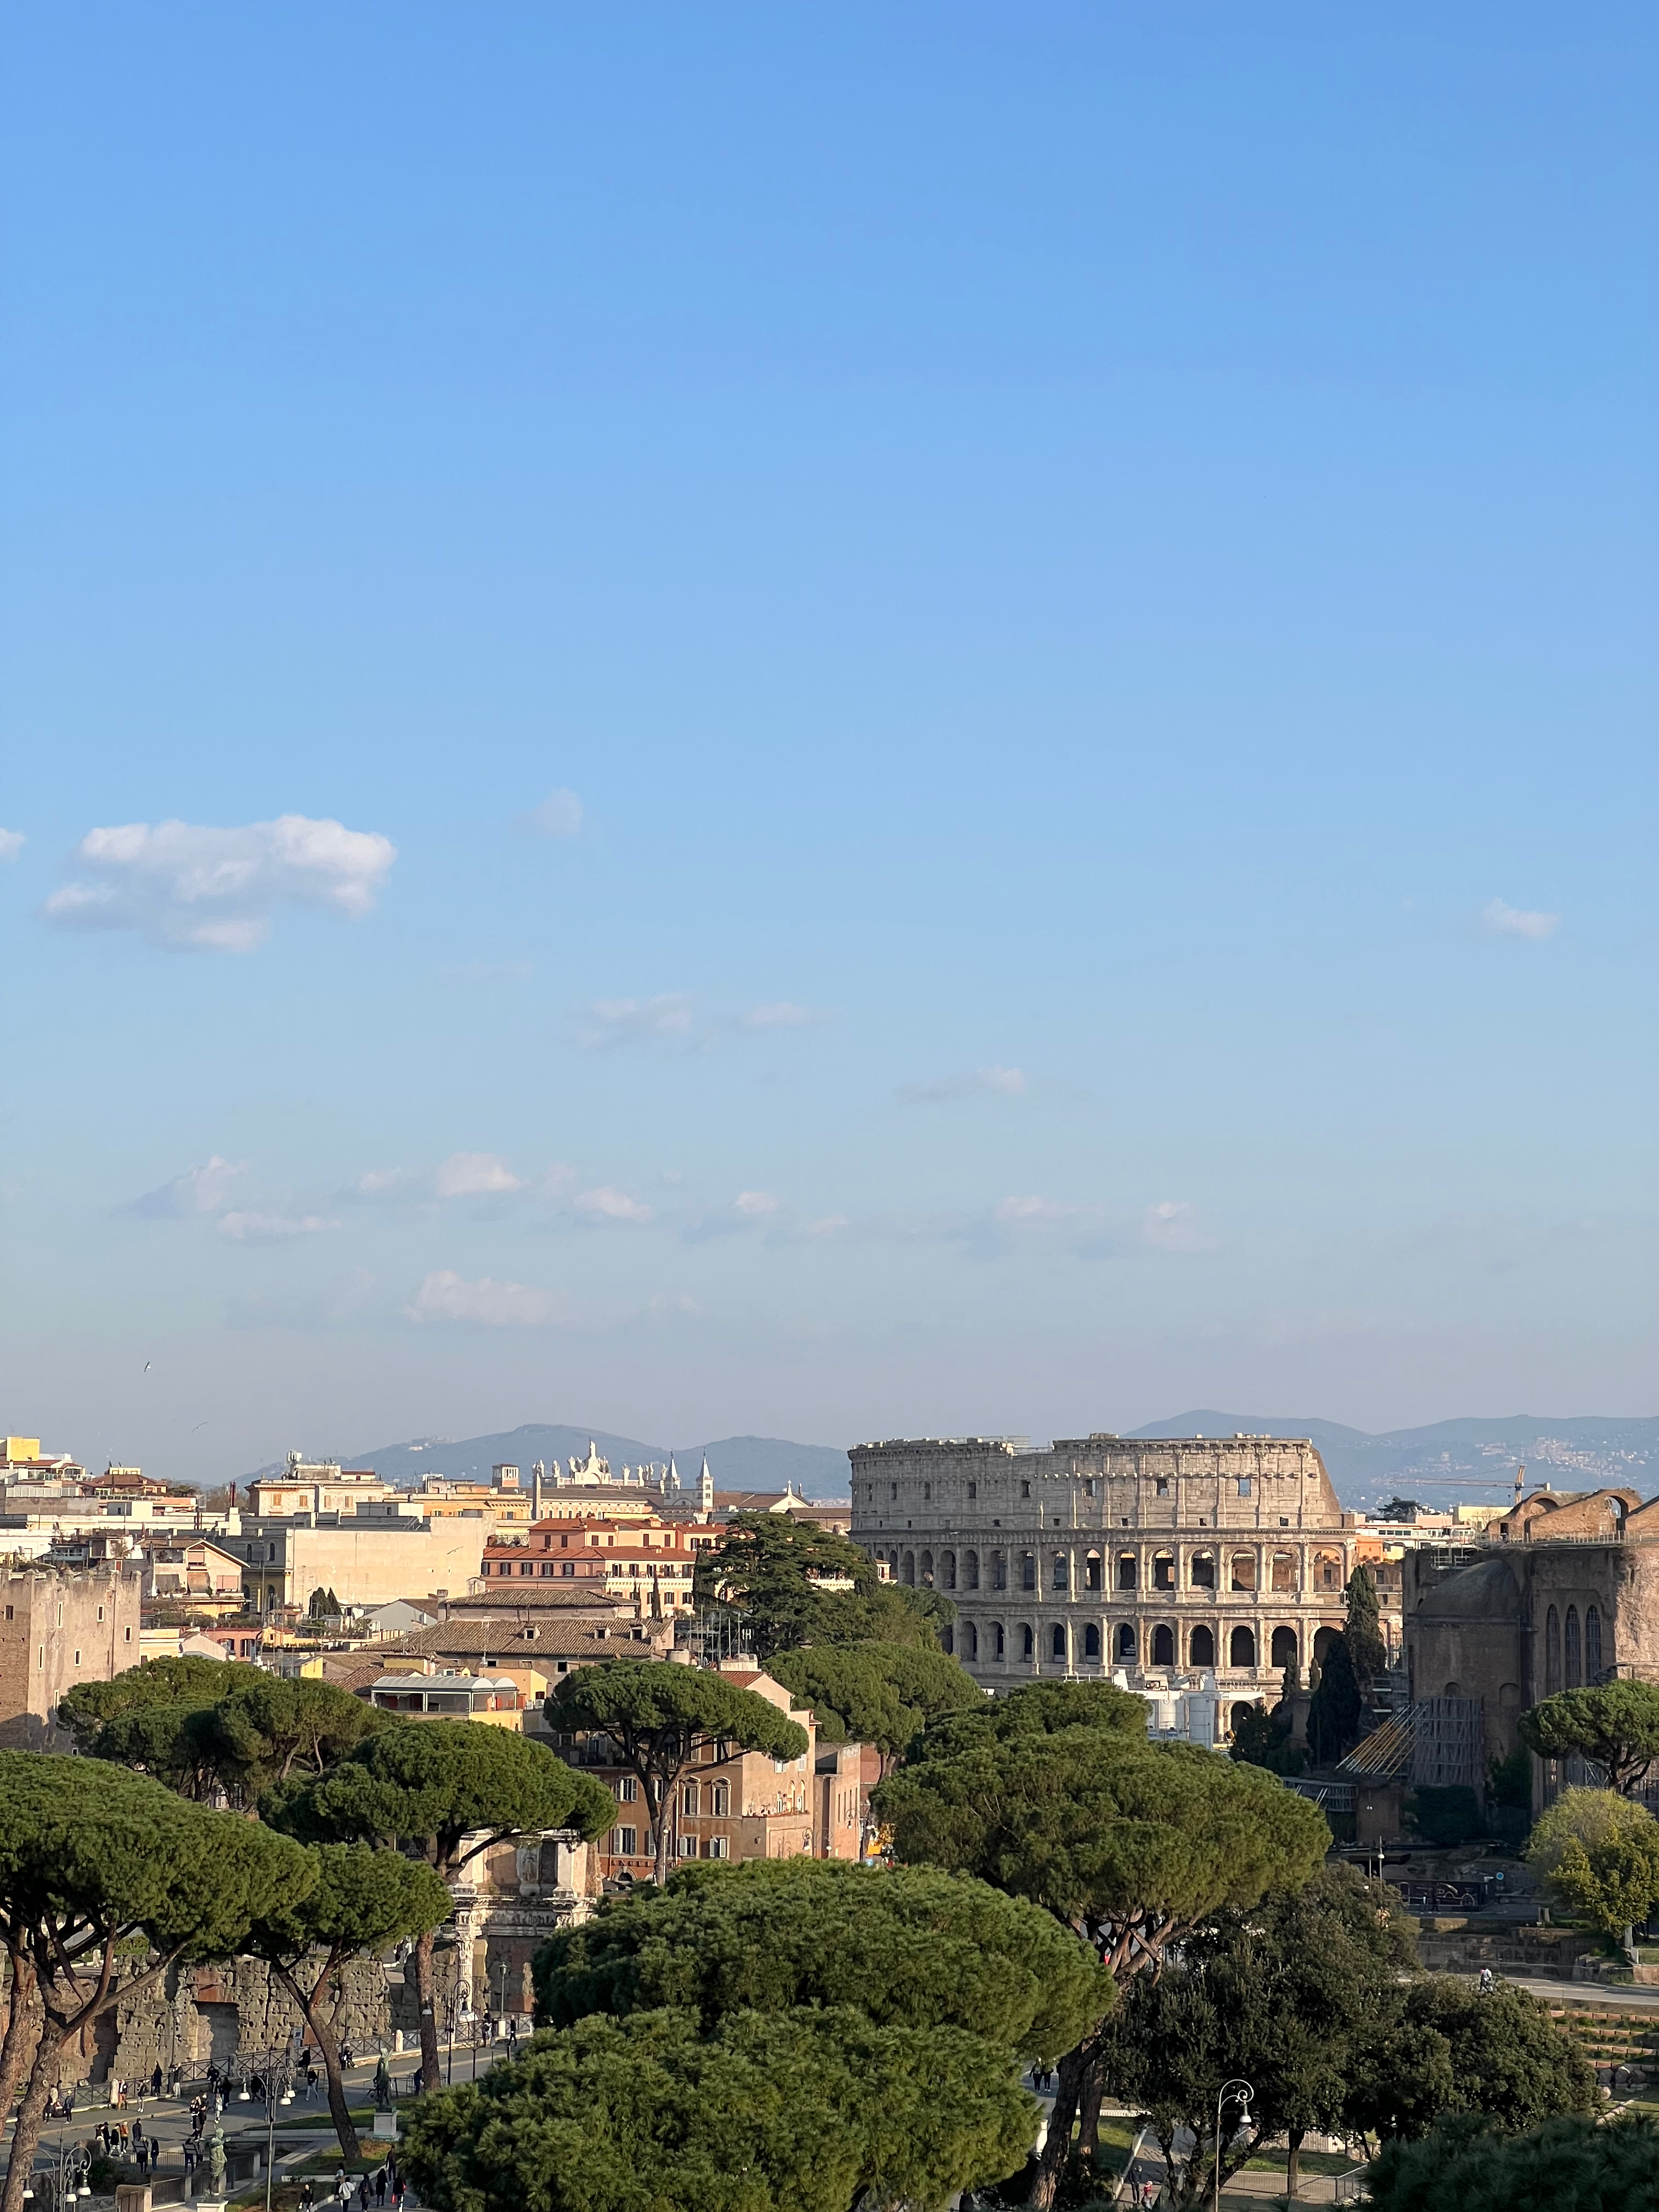 View of the Colloseum from the Monumento a Vittorio Emanuele II